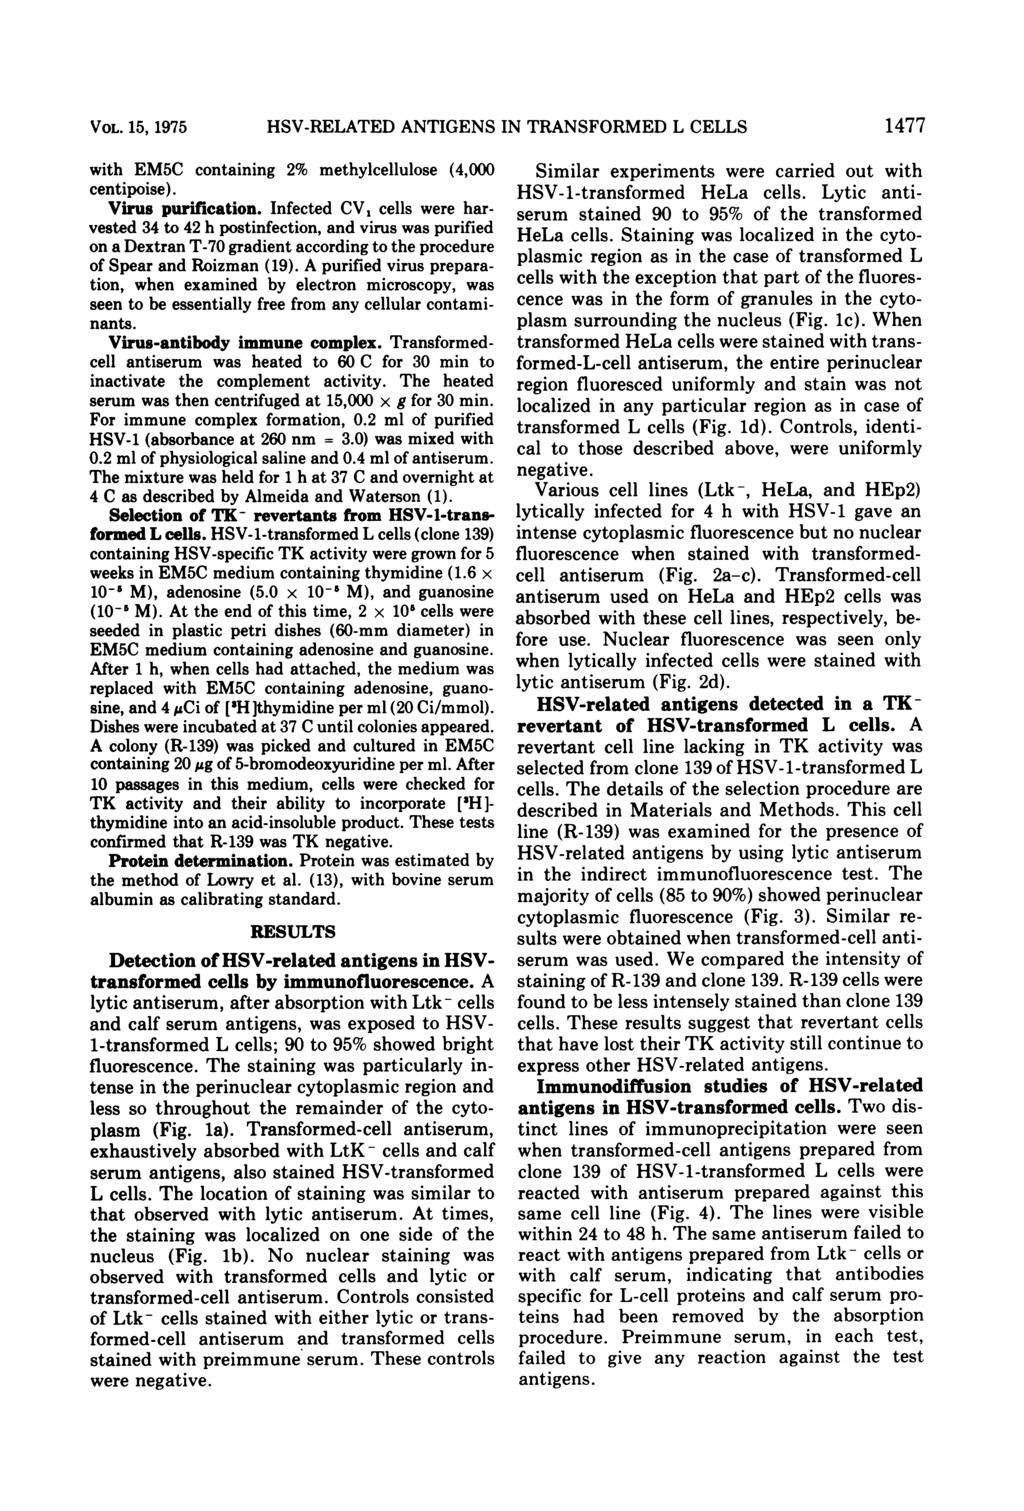 VOL. 15, 1975 HSV-RELATED ANTIGENS IN TRANSFORMED L CELLS 1477 with EM5C containing 2% methylcellulose (4,000 centipoise). Virus purification.